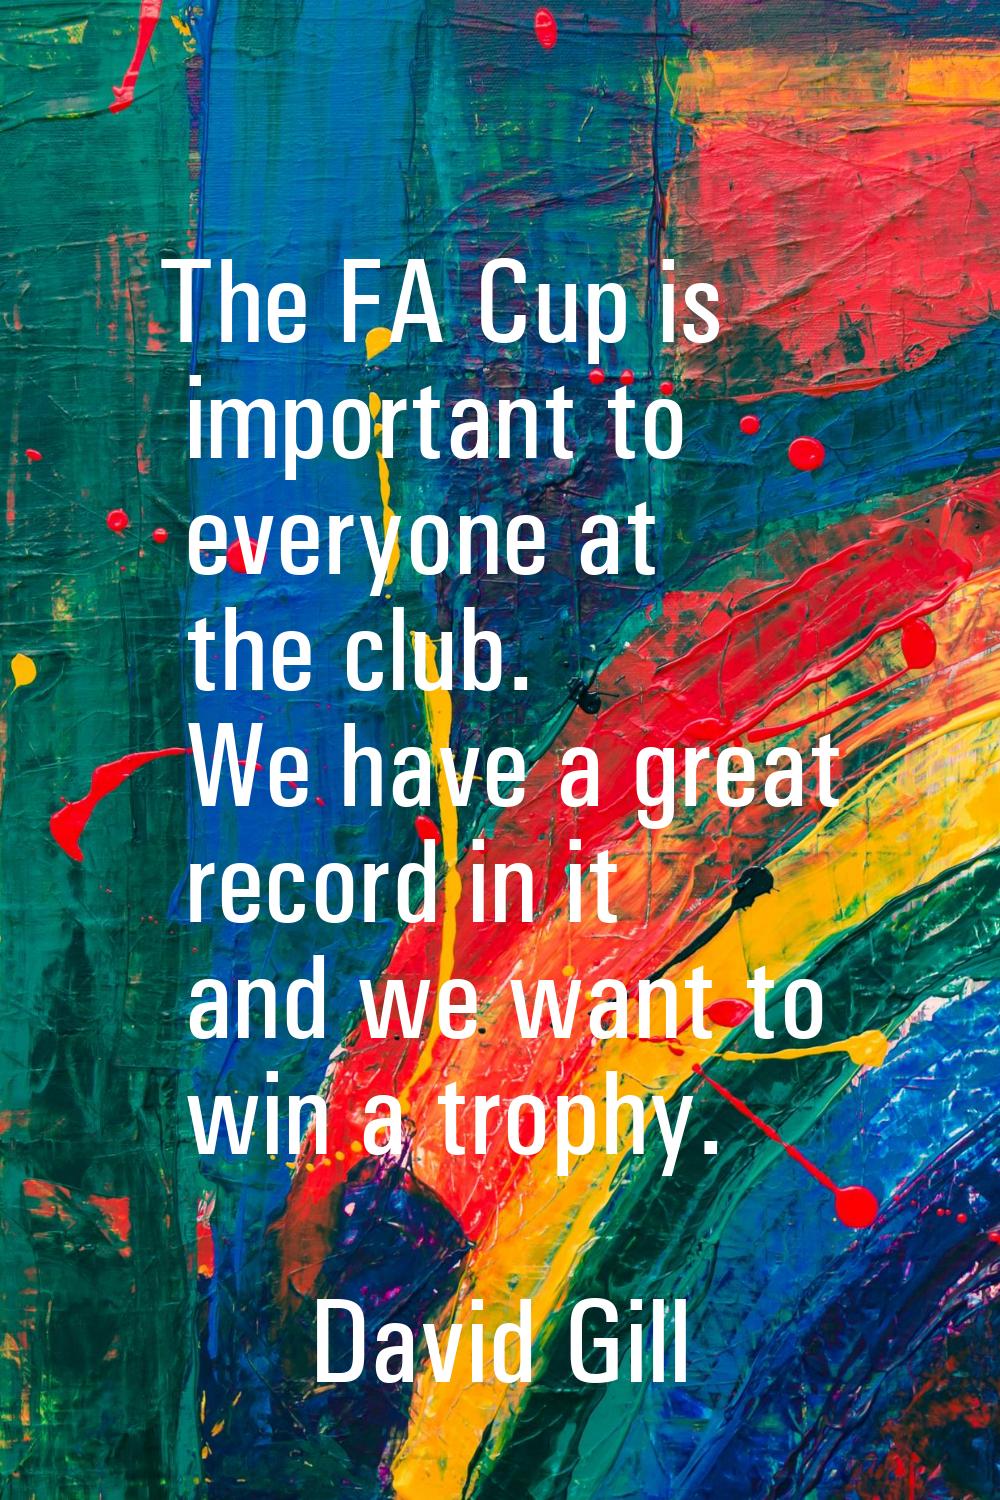 The FA Cup is important to everyone at the club. We have a great record in it and we want to win a 